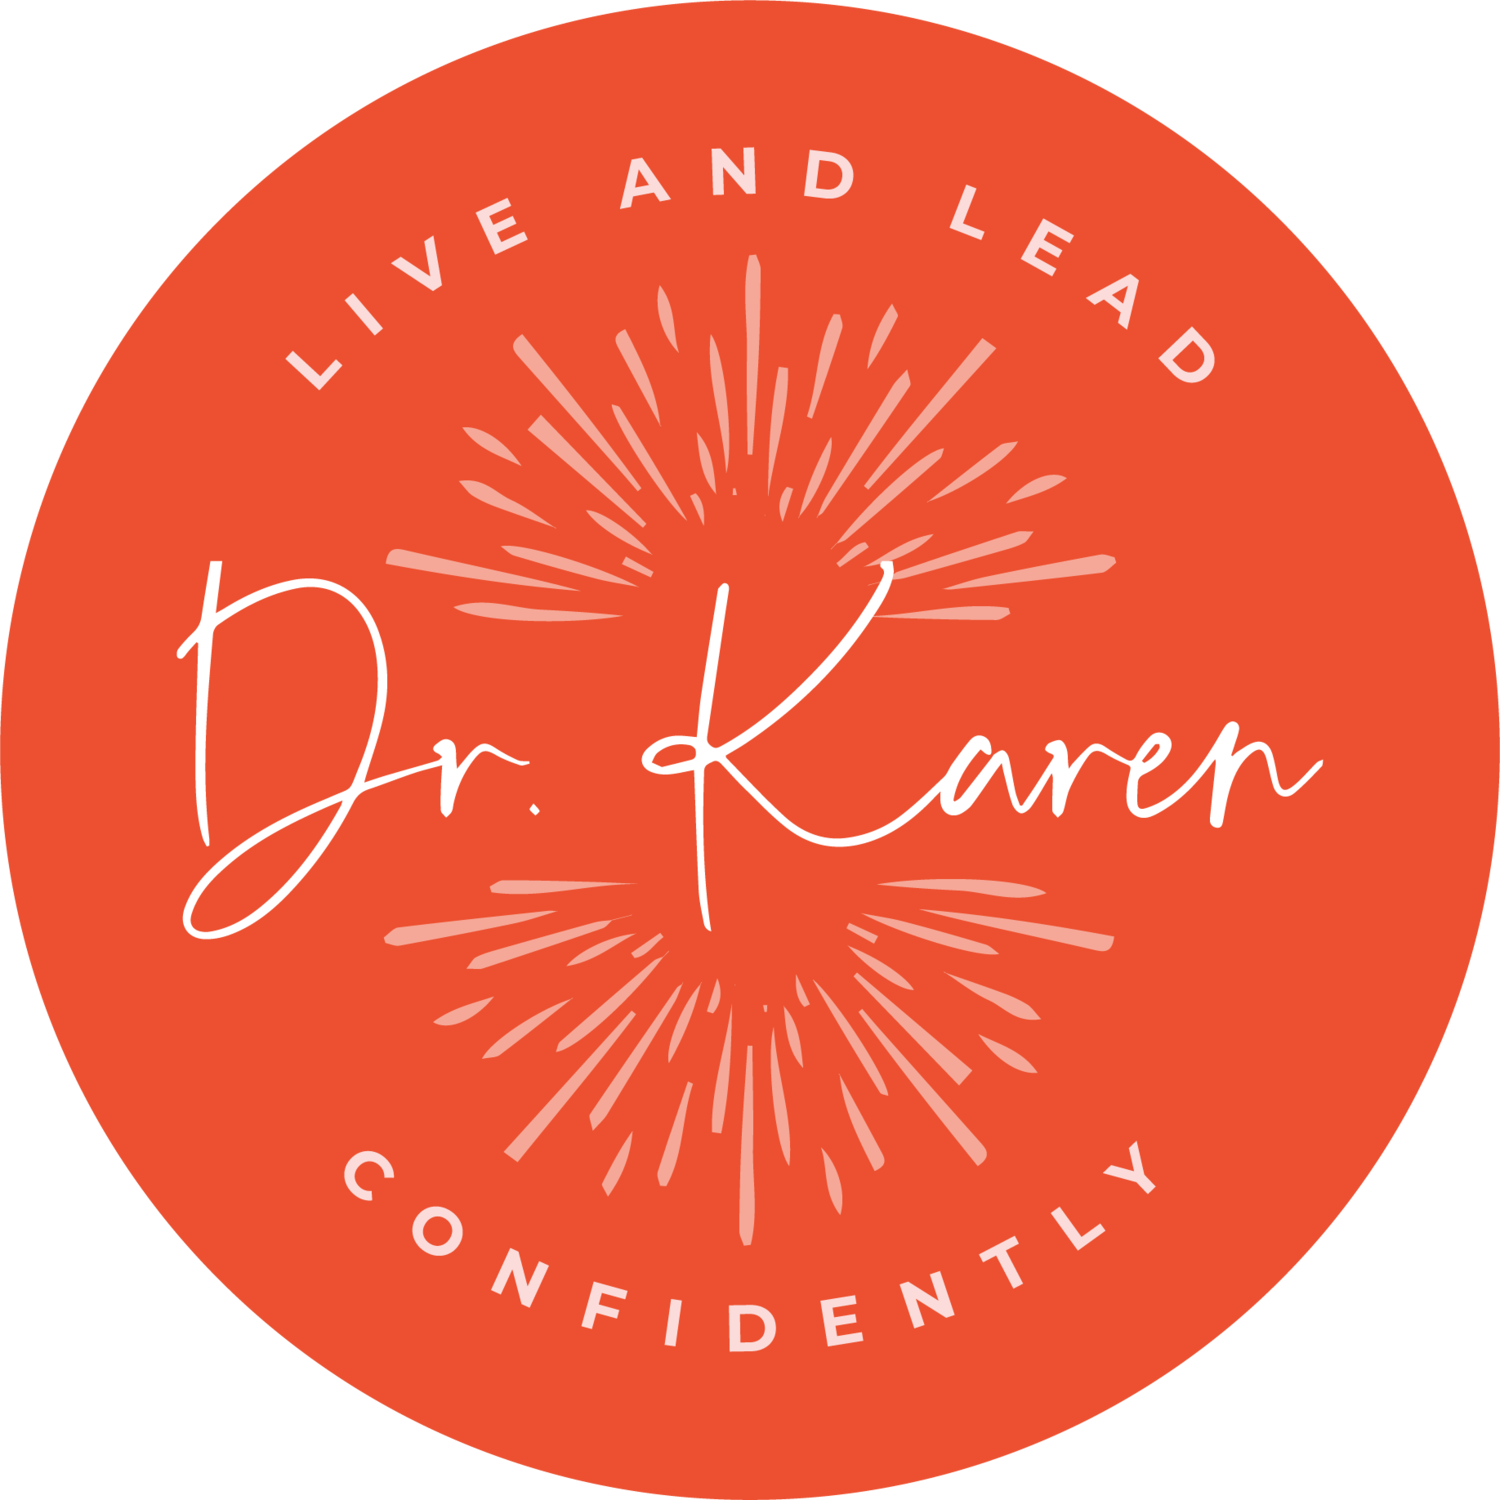 Dr. Karen Townsend | Live and Lead Confidently